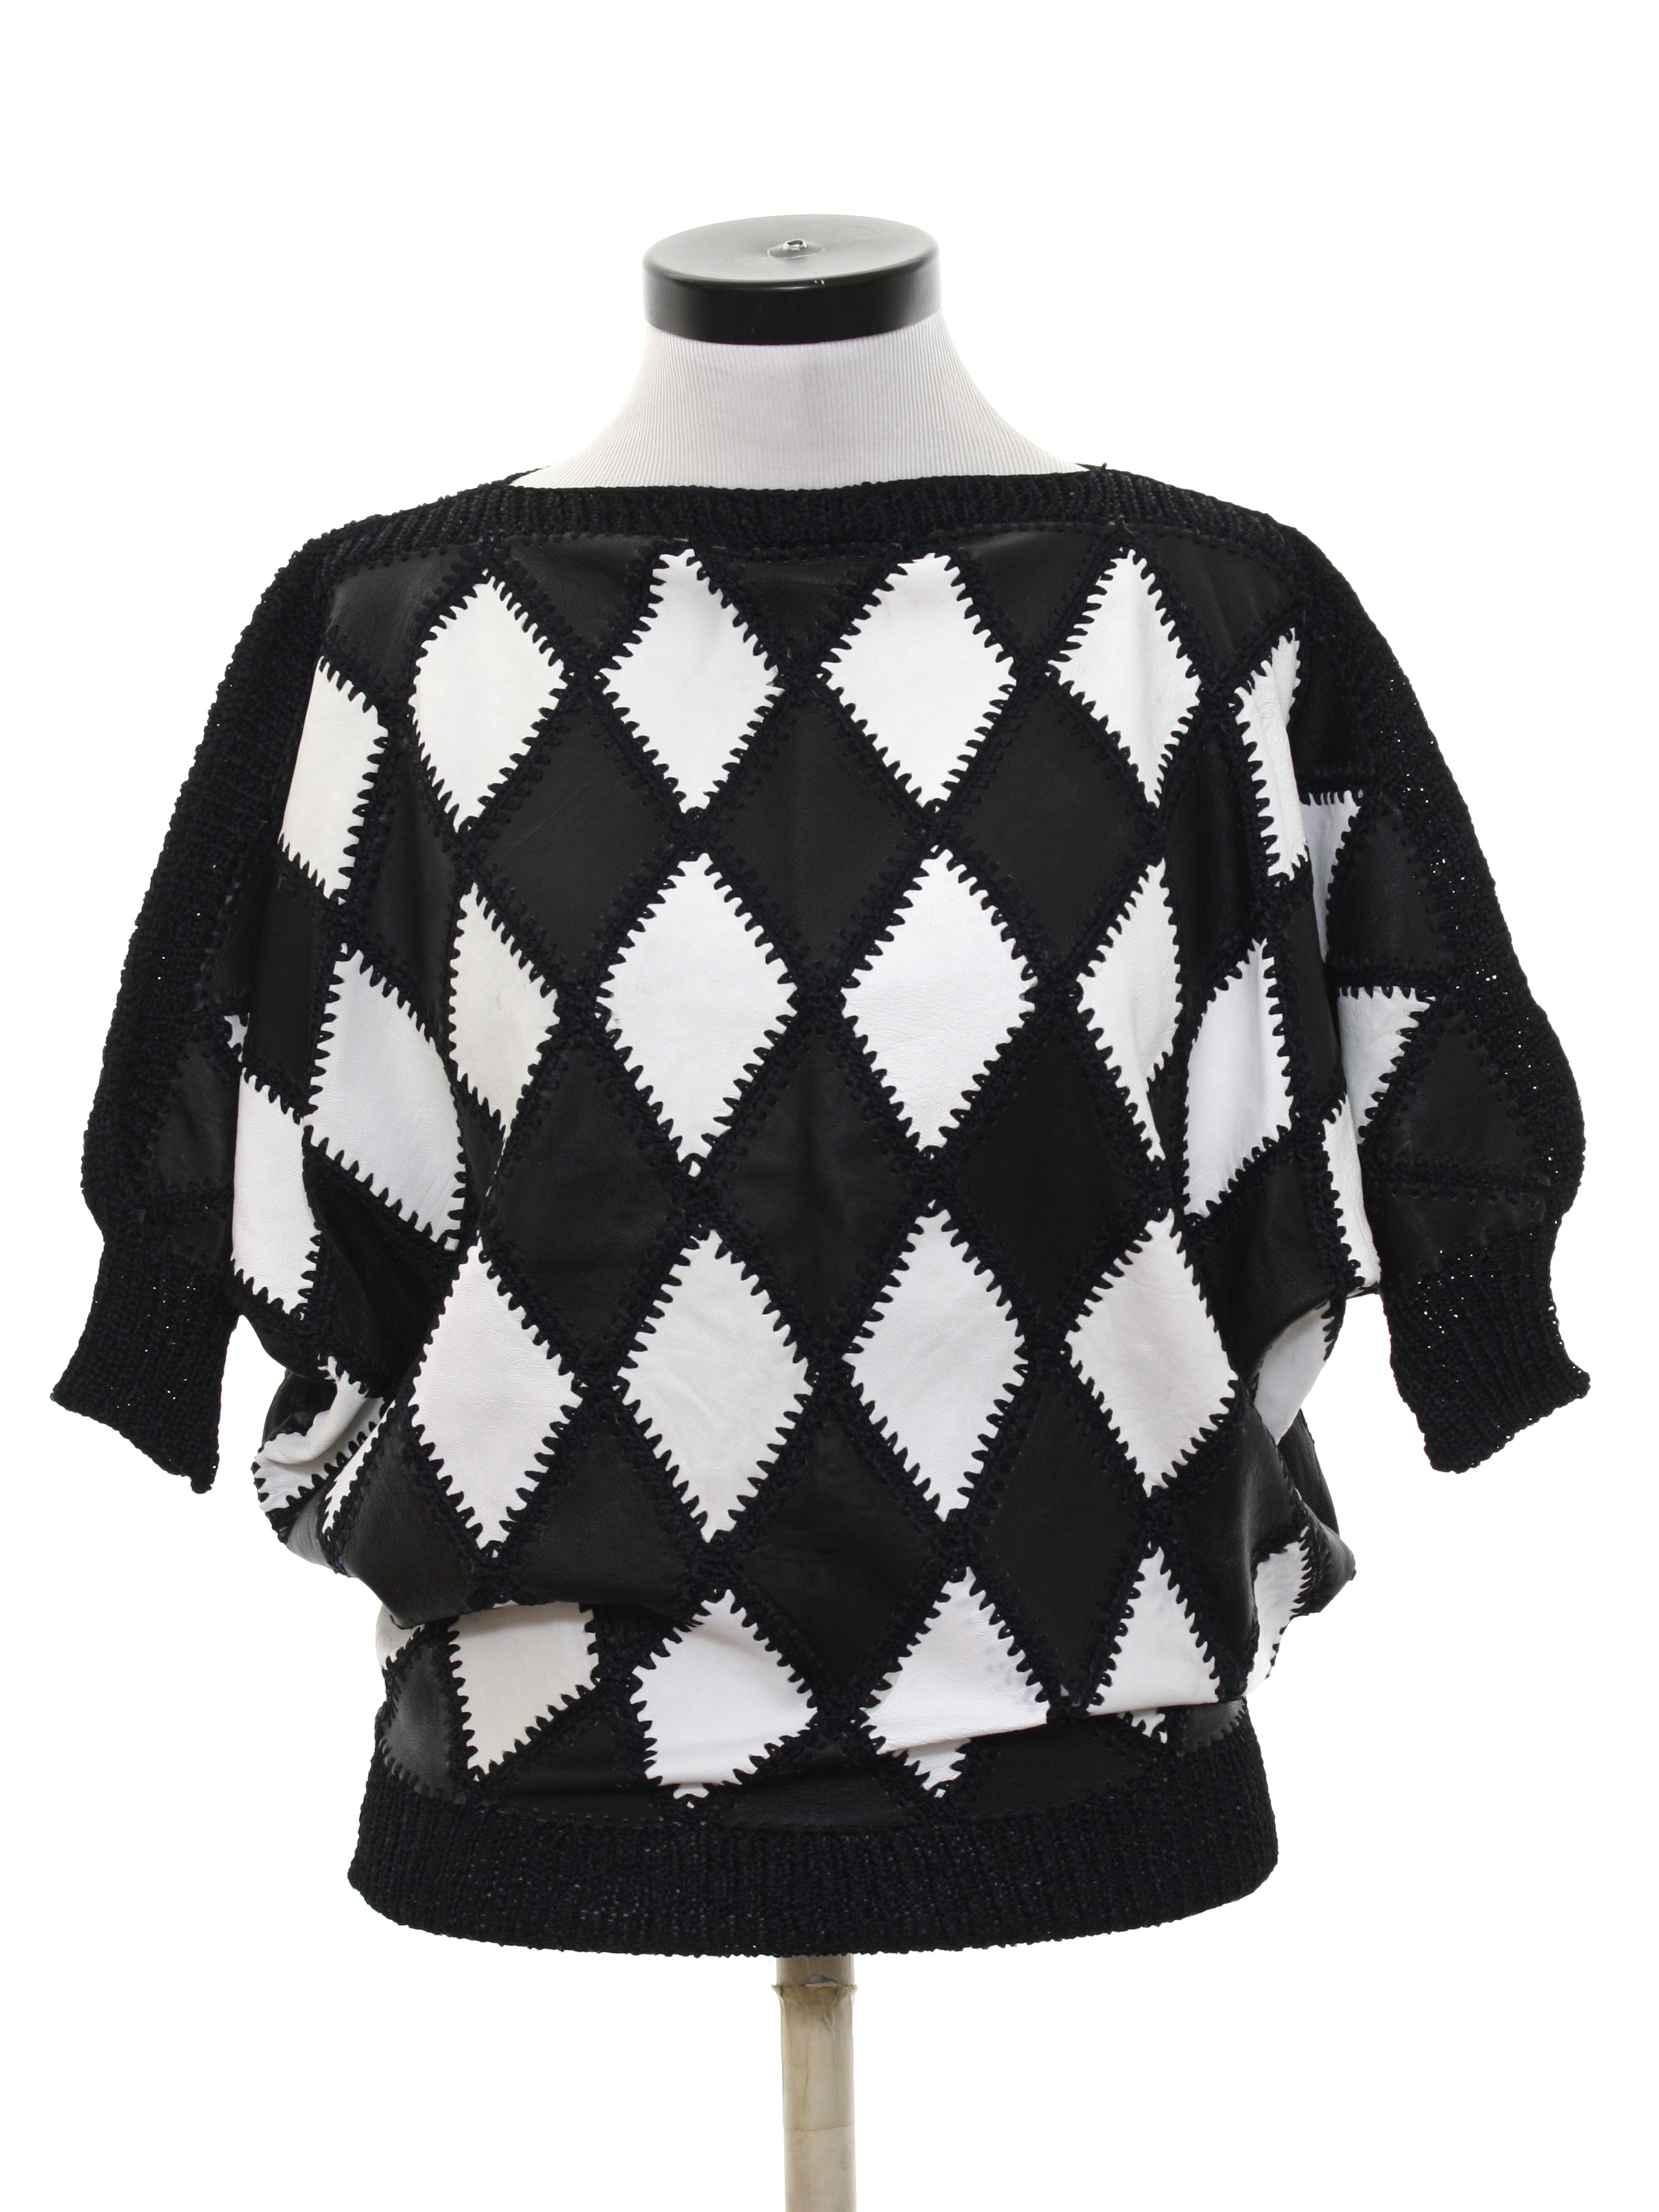 1980's Retro Sweater: 80s -Missing Label- Womens black and white woven ...